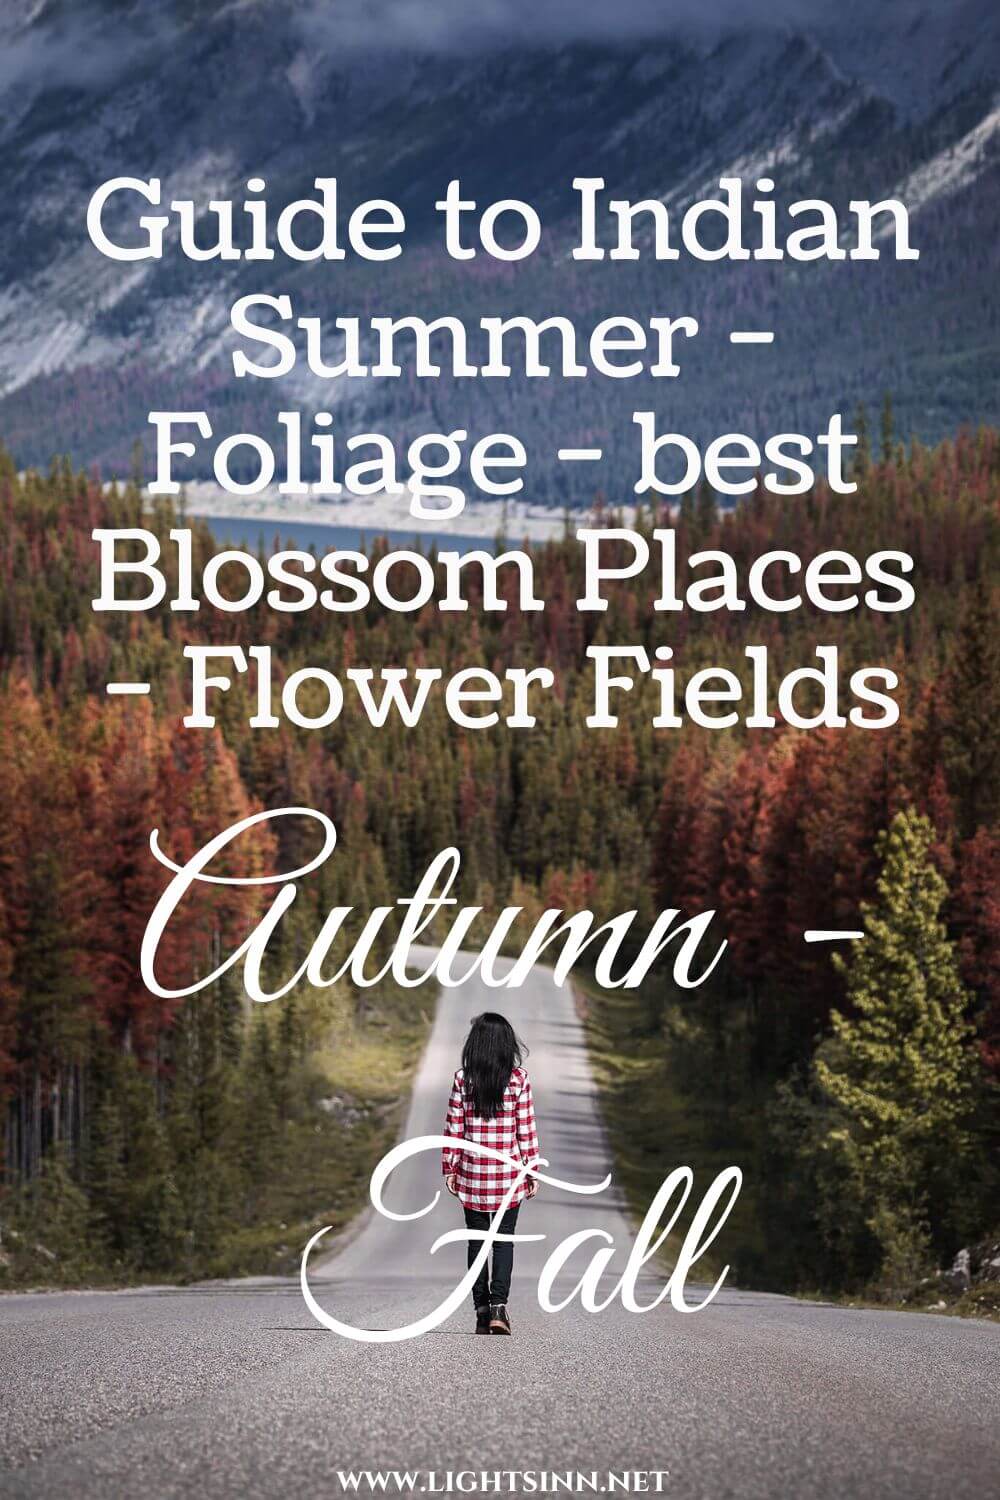 autum-at-fall-blossom-indian-summer-herbst-foliage-berge-mountains